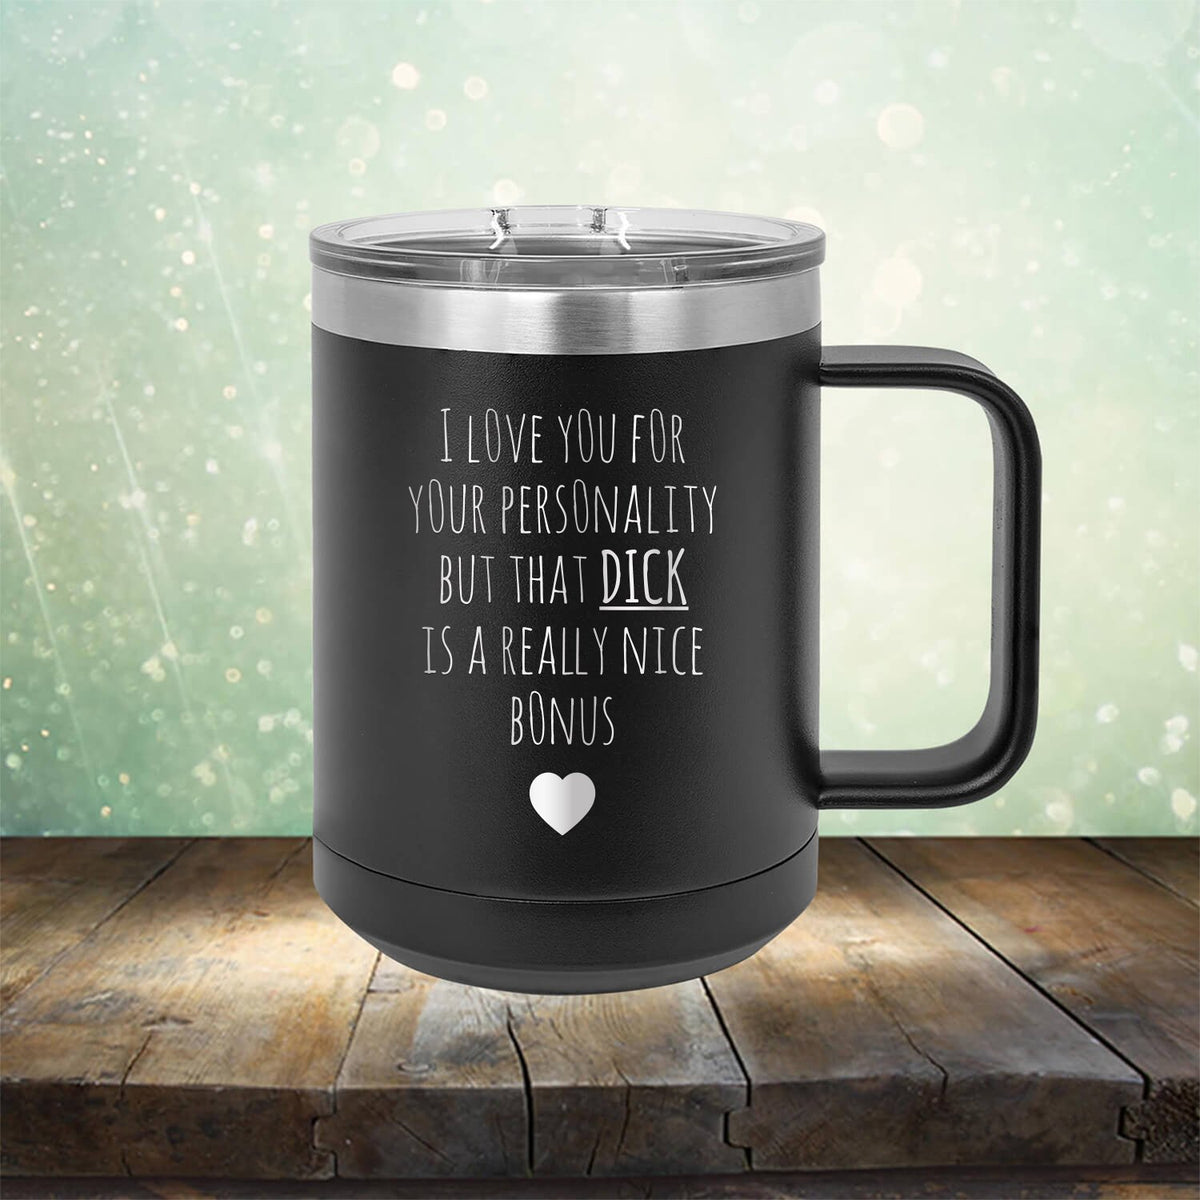 I Love You for Your Personality But That Dick Is A Really Nice Bonus - Laser Etched Tumbler Mug